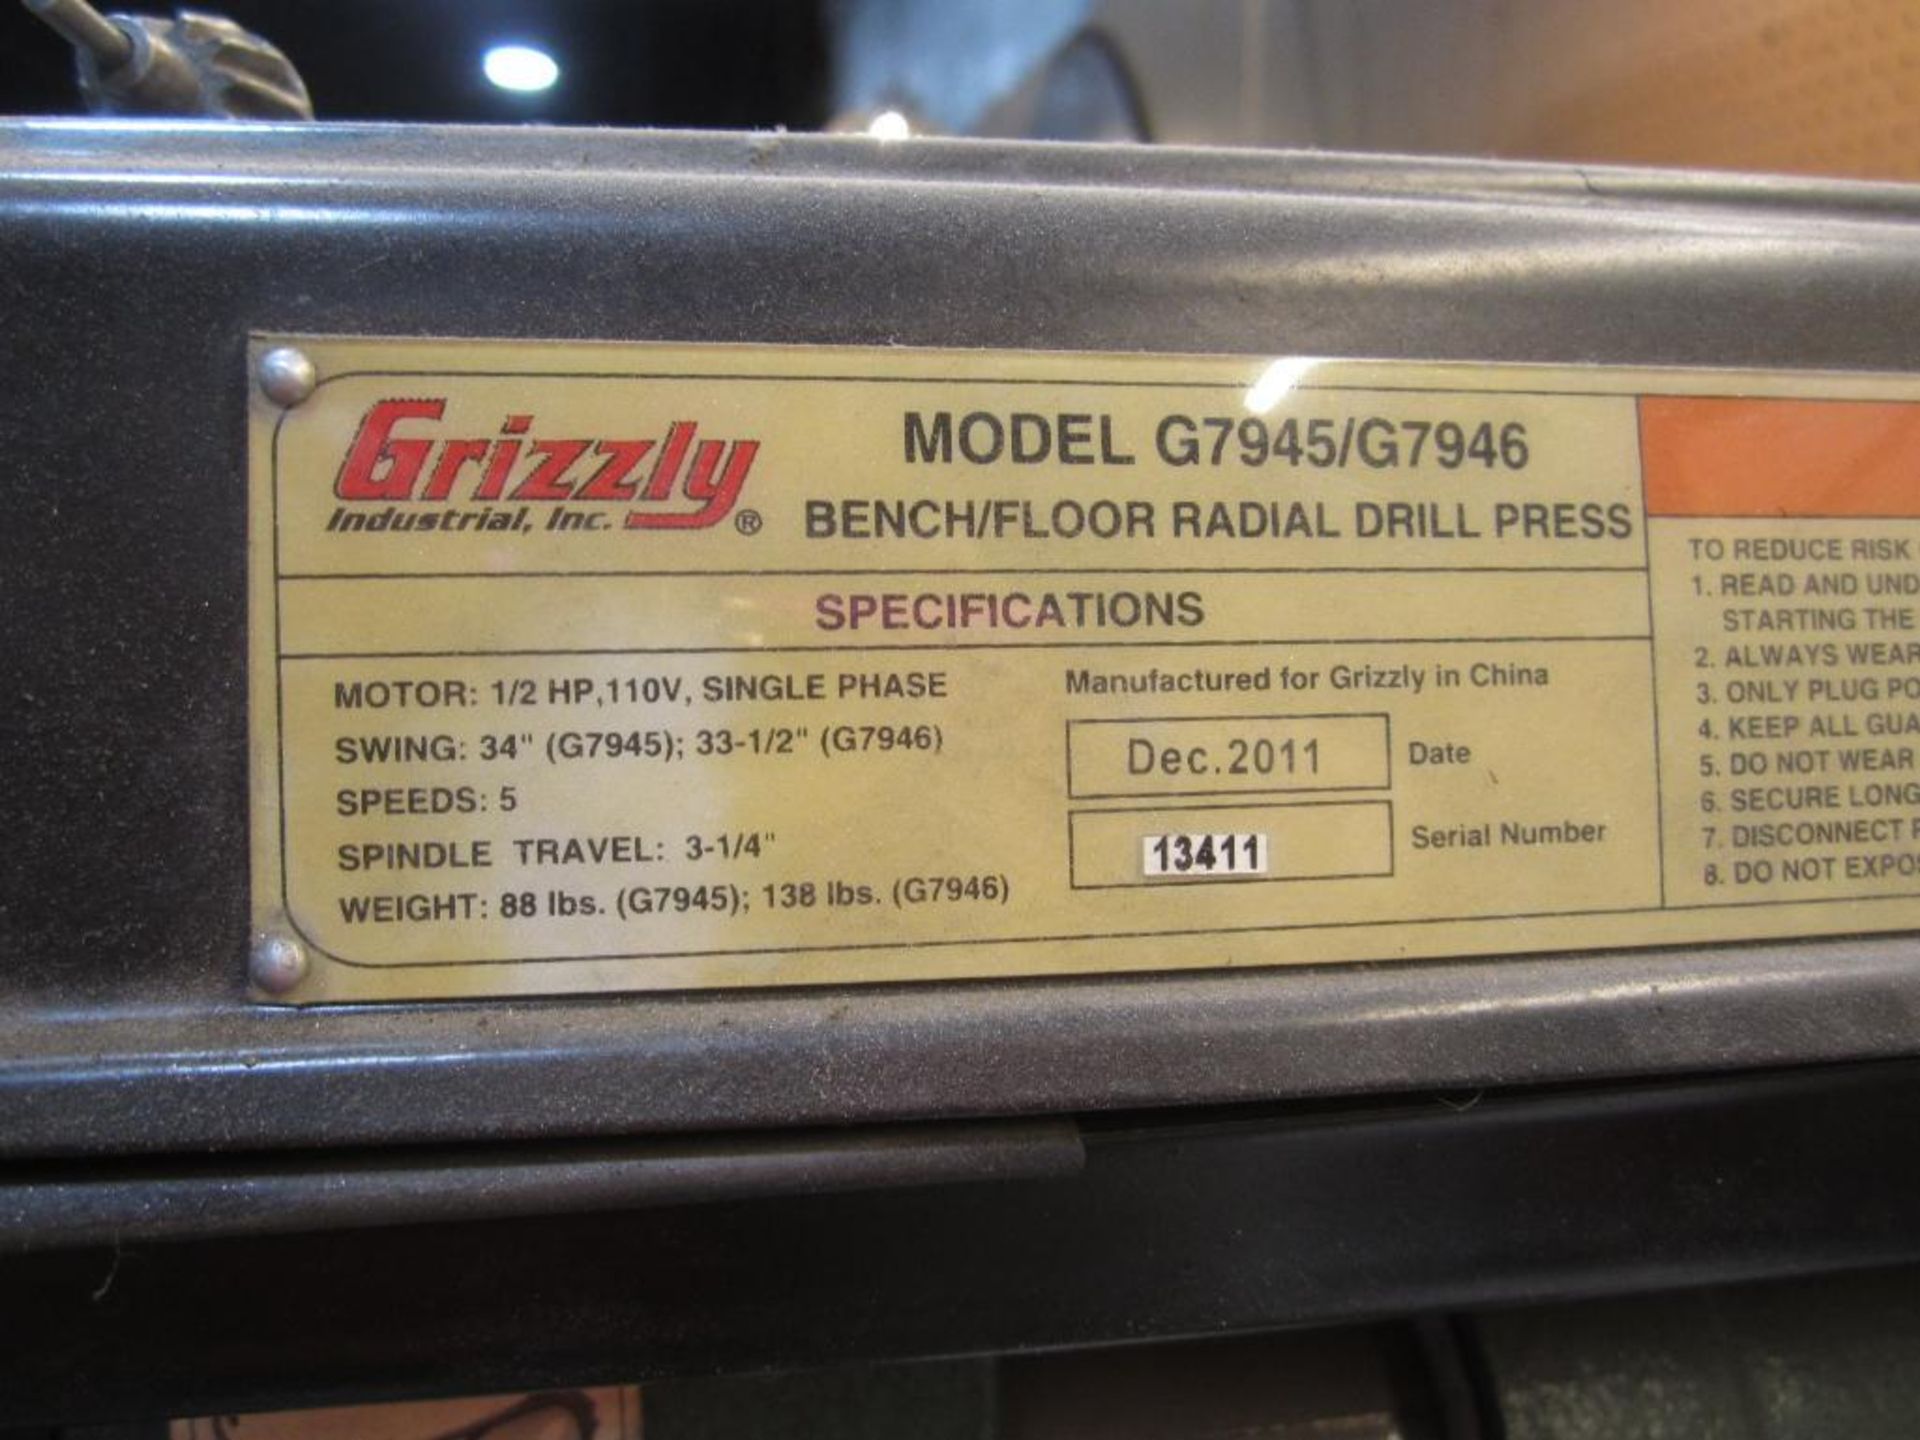 Grizzly work bench radial drill press - Image 4 of 5